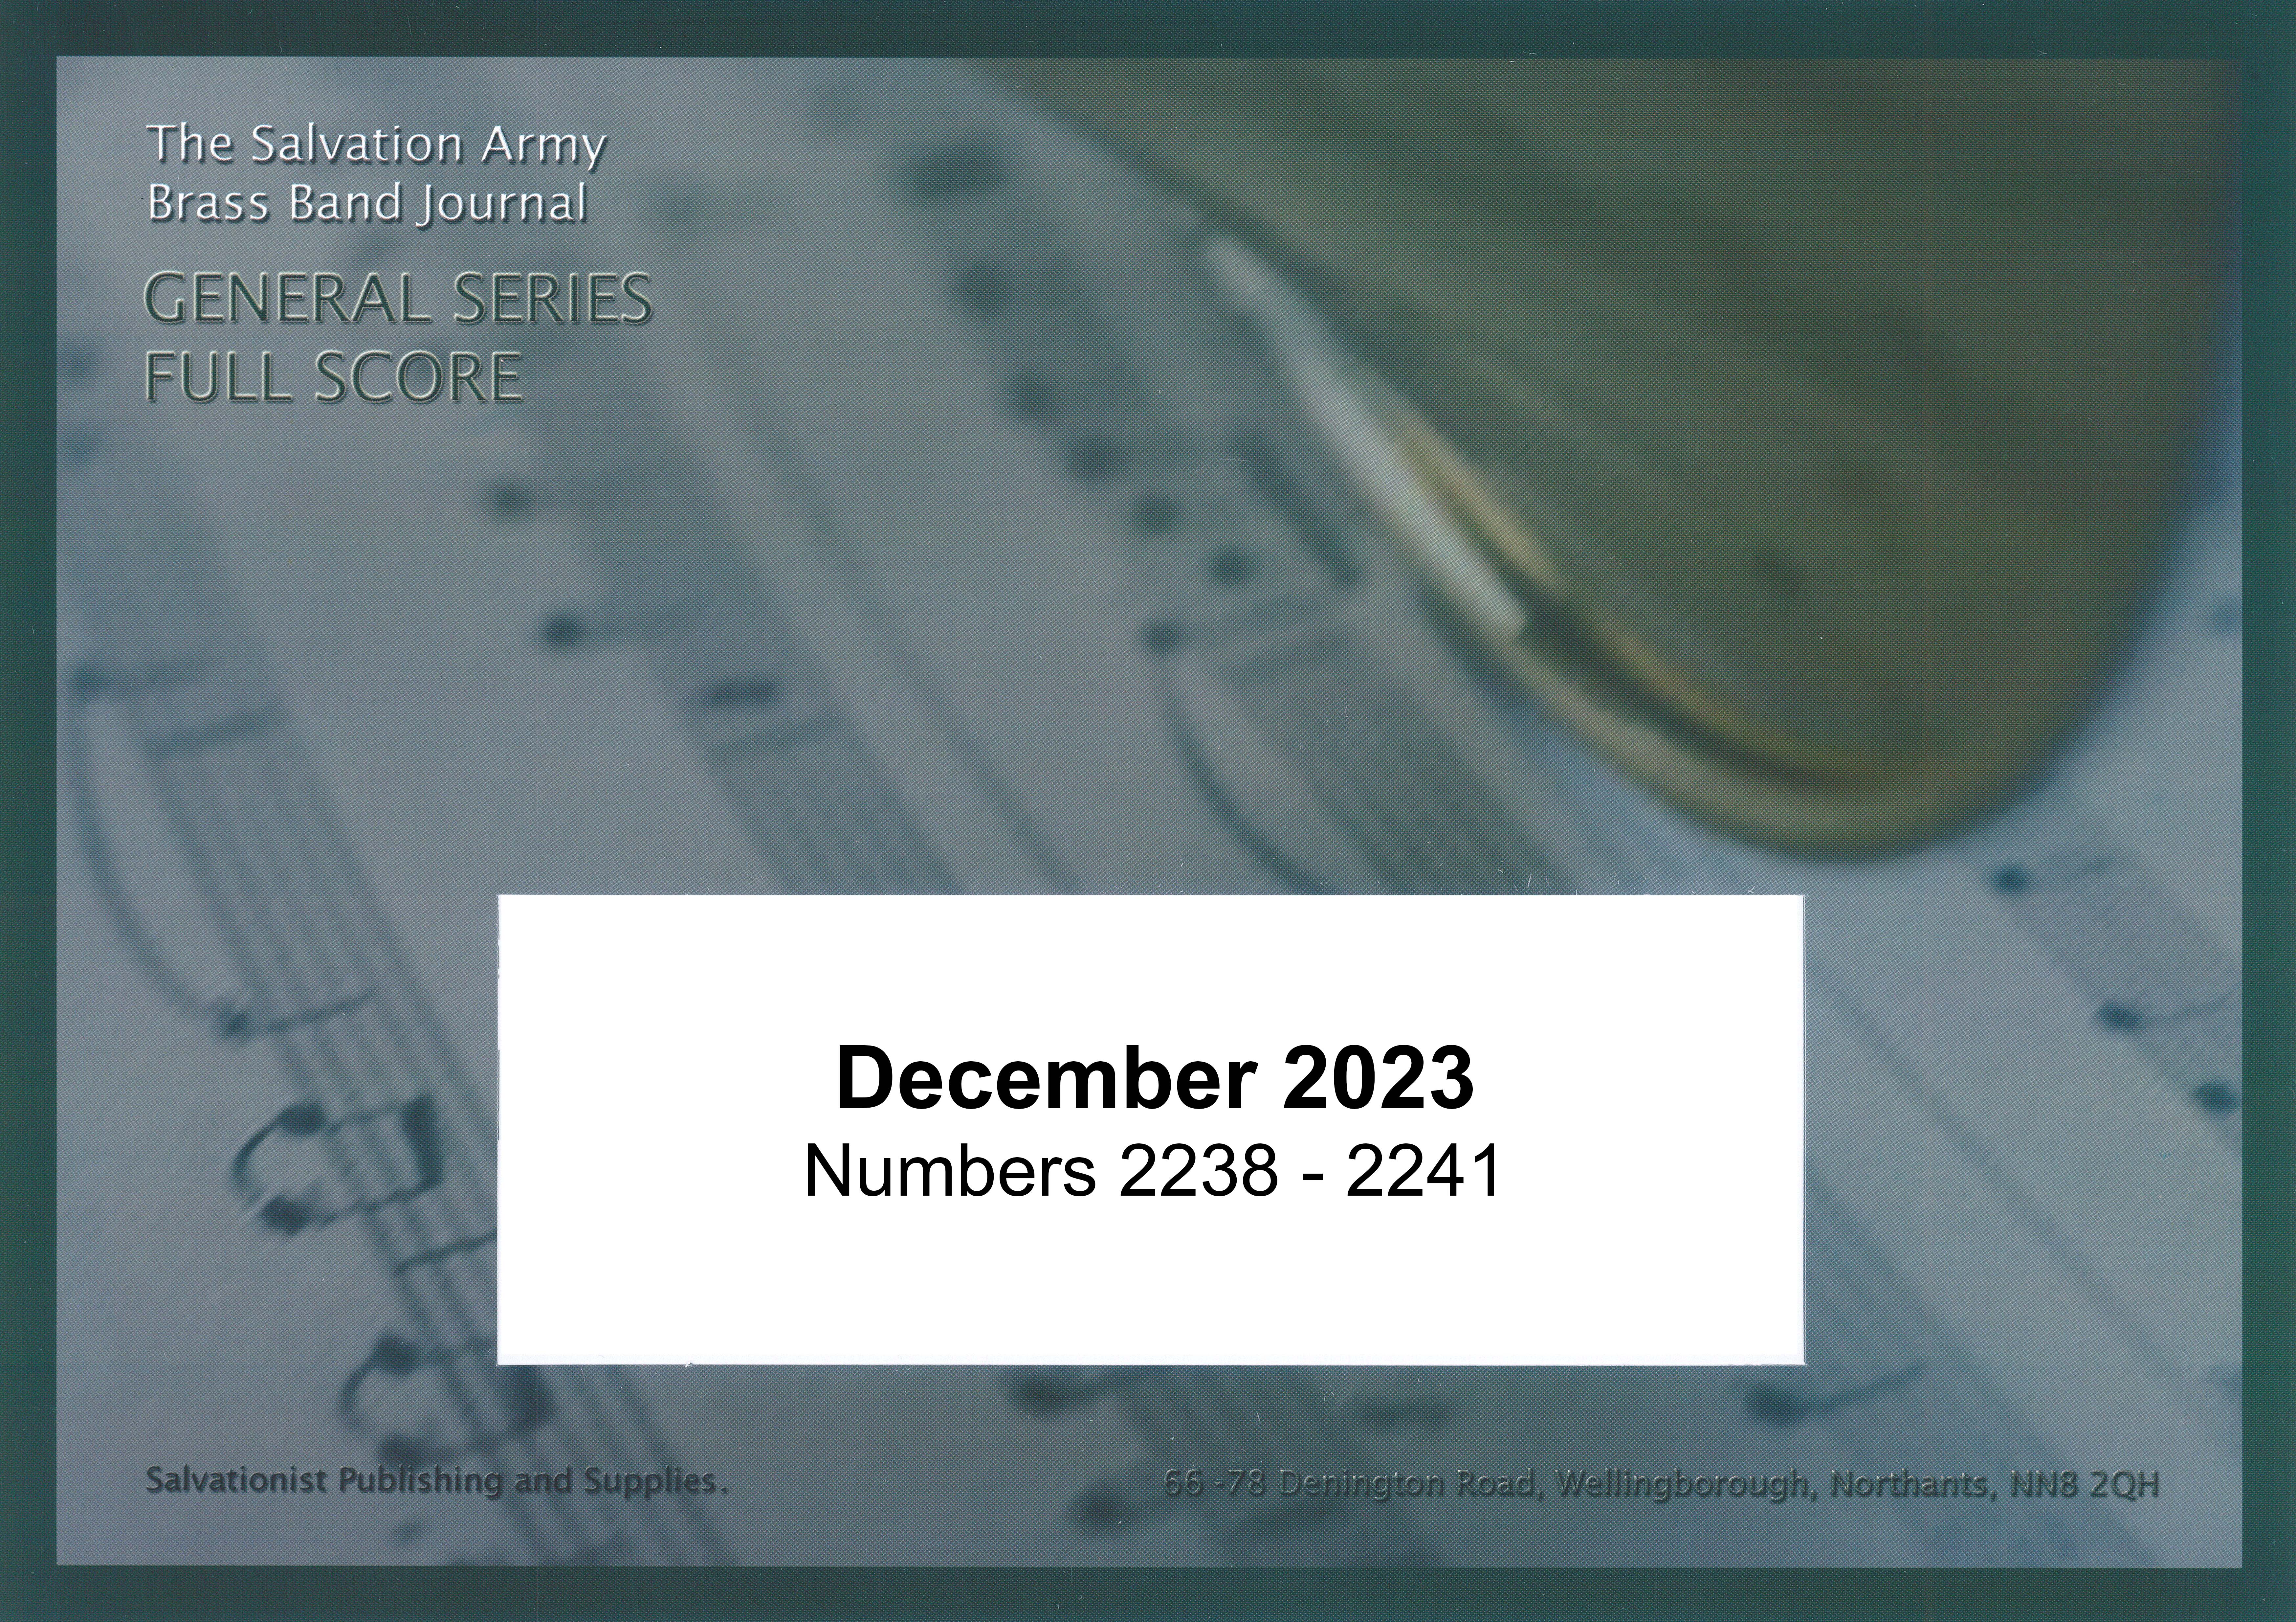 General Series Brass Band Journal, Numbers 2238 - 2241, December 2023